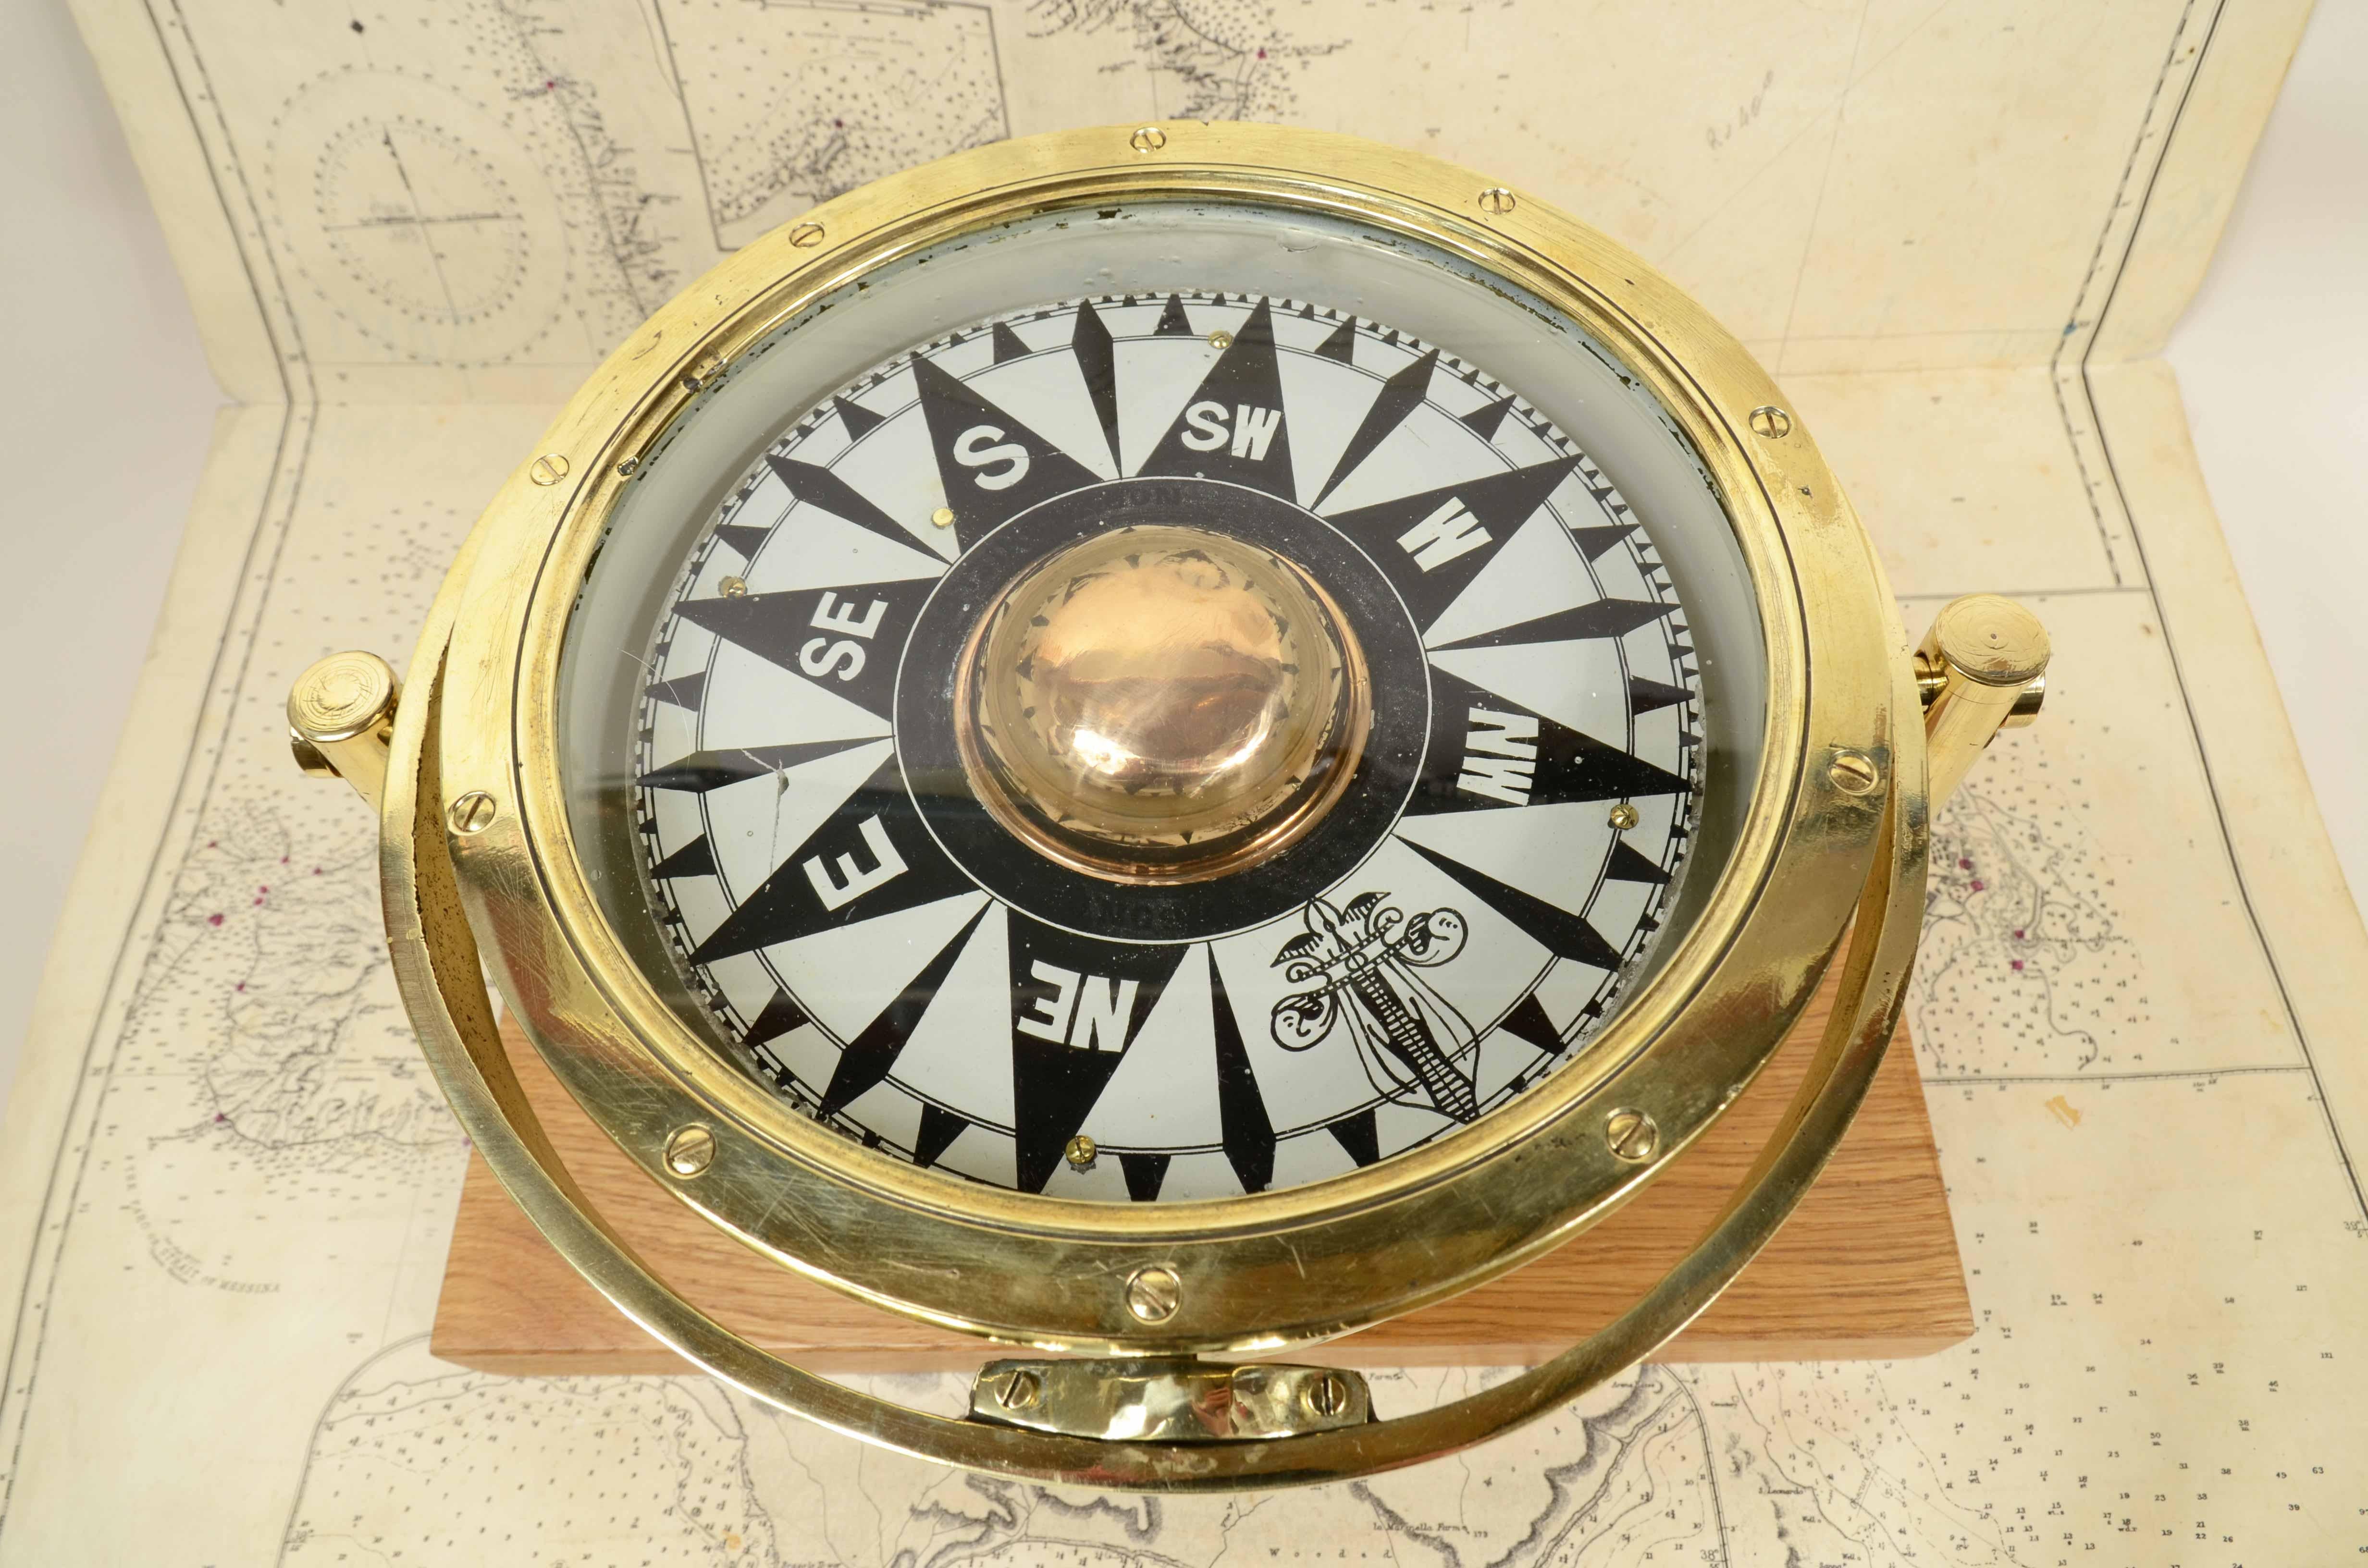 Large brass and glass nautical magnetic compass from the early 1900s, mounted on custom-made oak and brass board. Compass diameter cm 24.5 - inch 9.4, height with base cm 21 - inch 8.3, table width cm 36 - inch 14.2. Good condition, small crack on